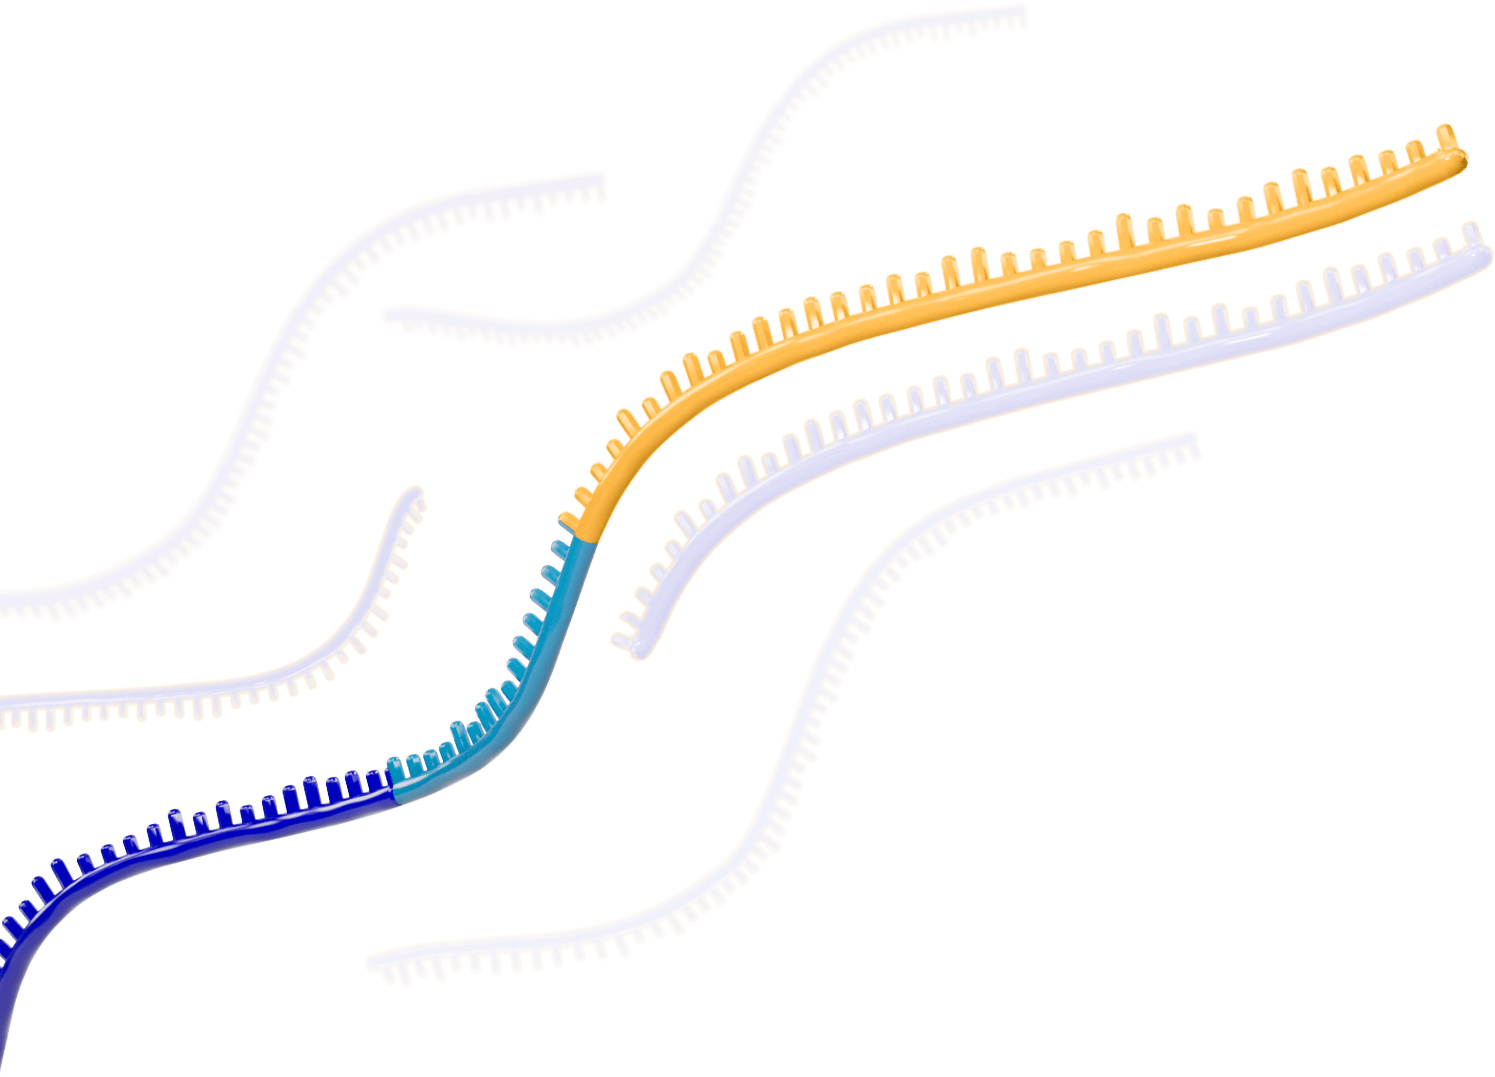 A strand of srRNA floats upwards to the right. Behind it, copied mRNA segments are visible.